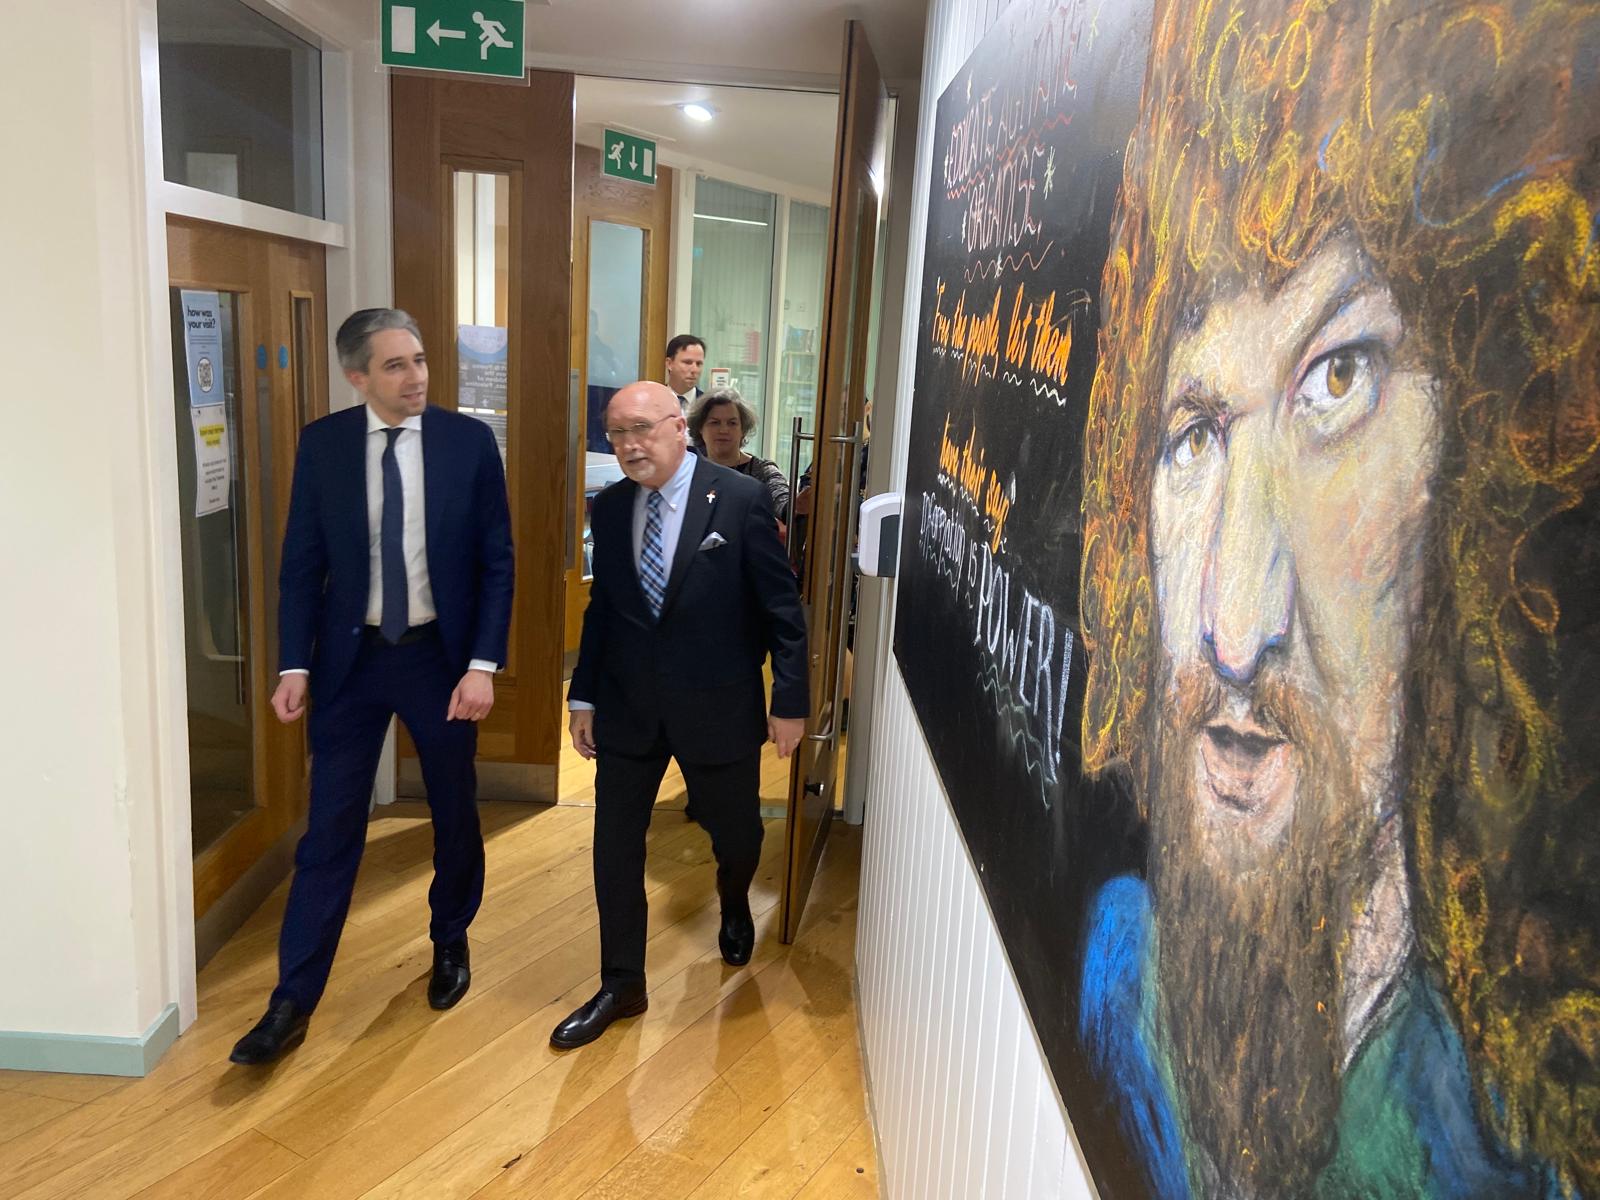 FÁILTE: The Rev Bill Shaw shows the Taoiseach around the arts centre